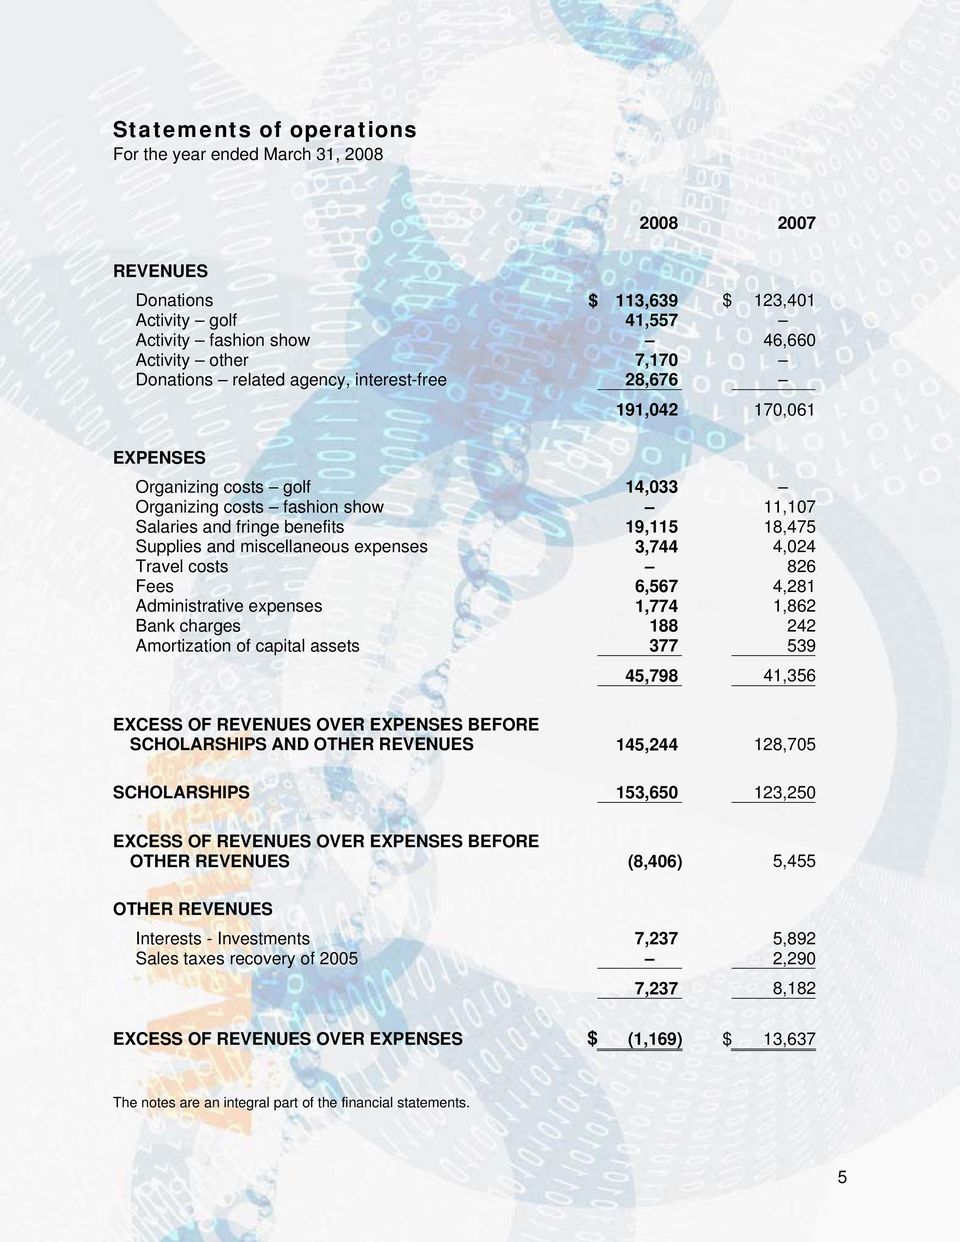 3,744 4,024 Travel costs 826 Fees 6,567 4,281 Administrative expenses 1,774 1,862 Bank charges 188 242 Amortization of capital assets 377 539 45,798 41,356 EXCESS OF REVENUES OVER EXPENSES BEFORE